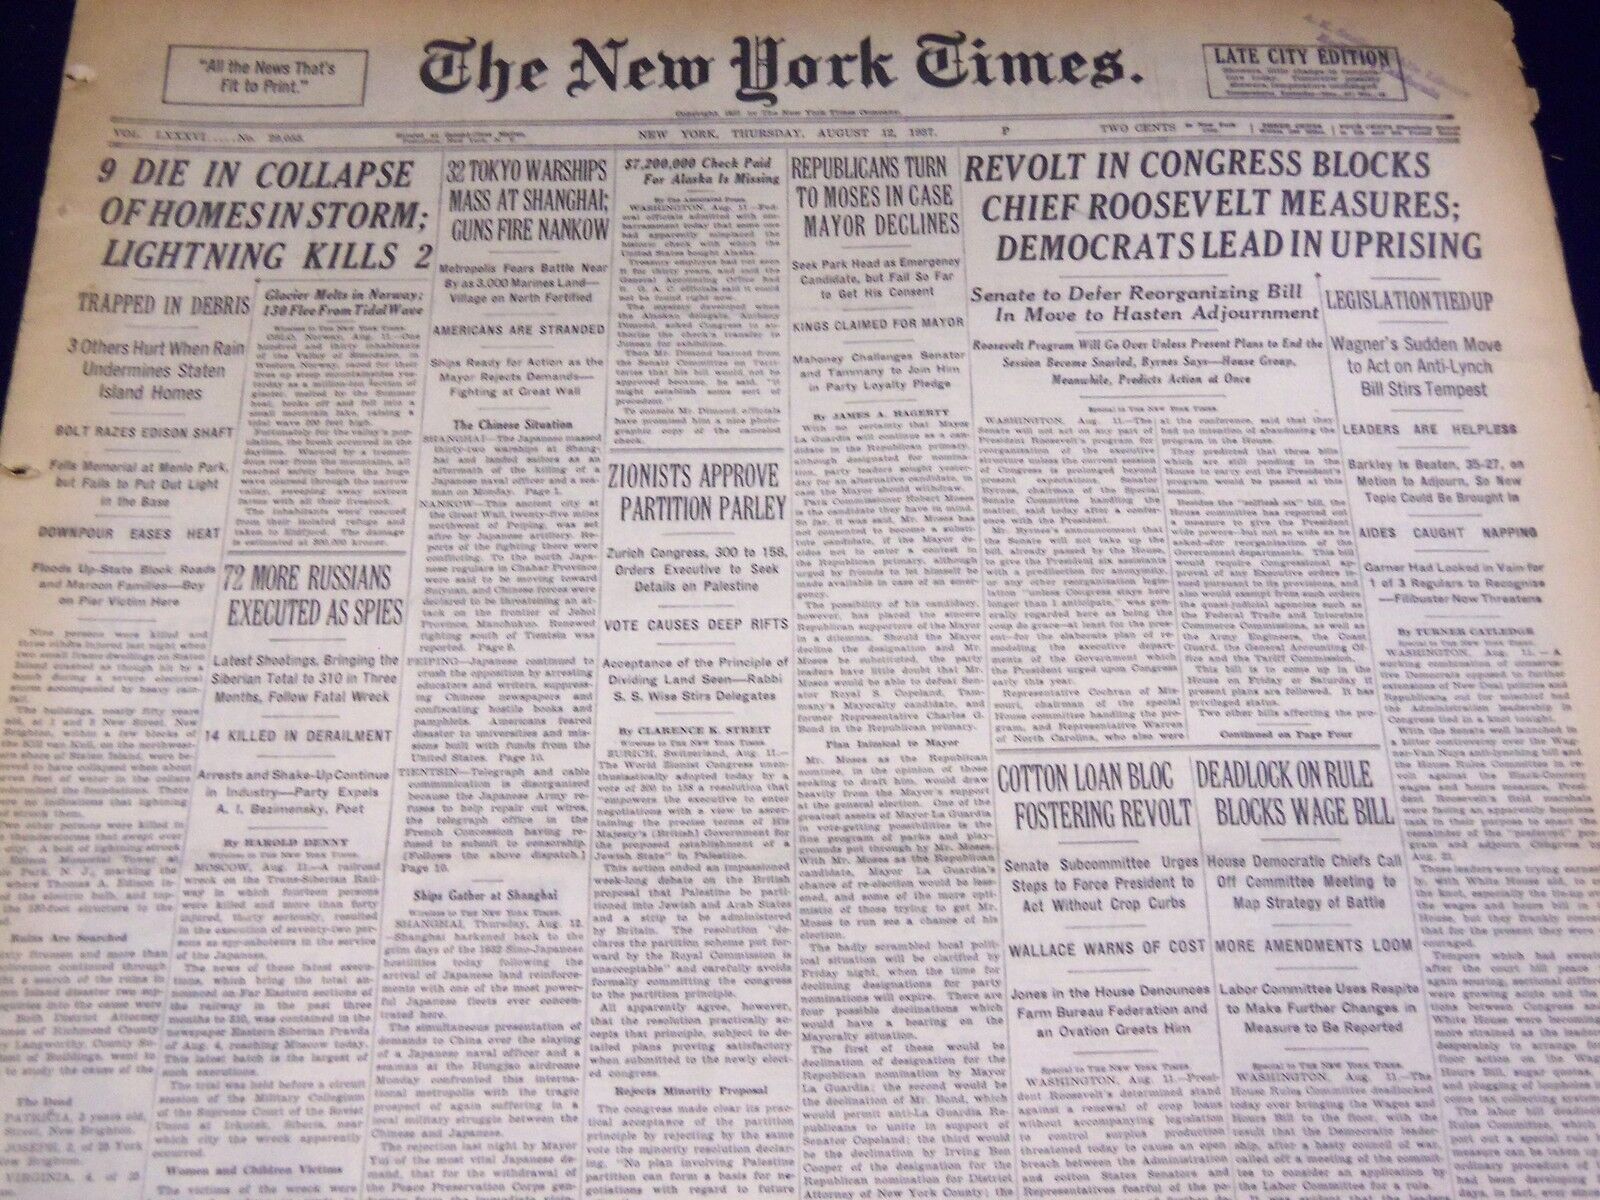 1937 AUGUST 12 NEW YORK TIMES - ZIONISTS APPROVE PARTITION - NT 3092